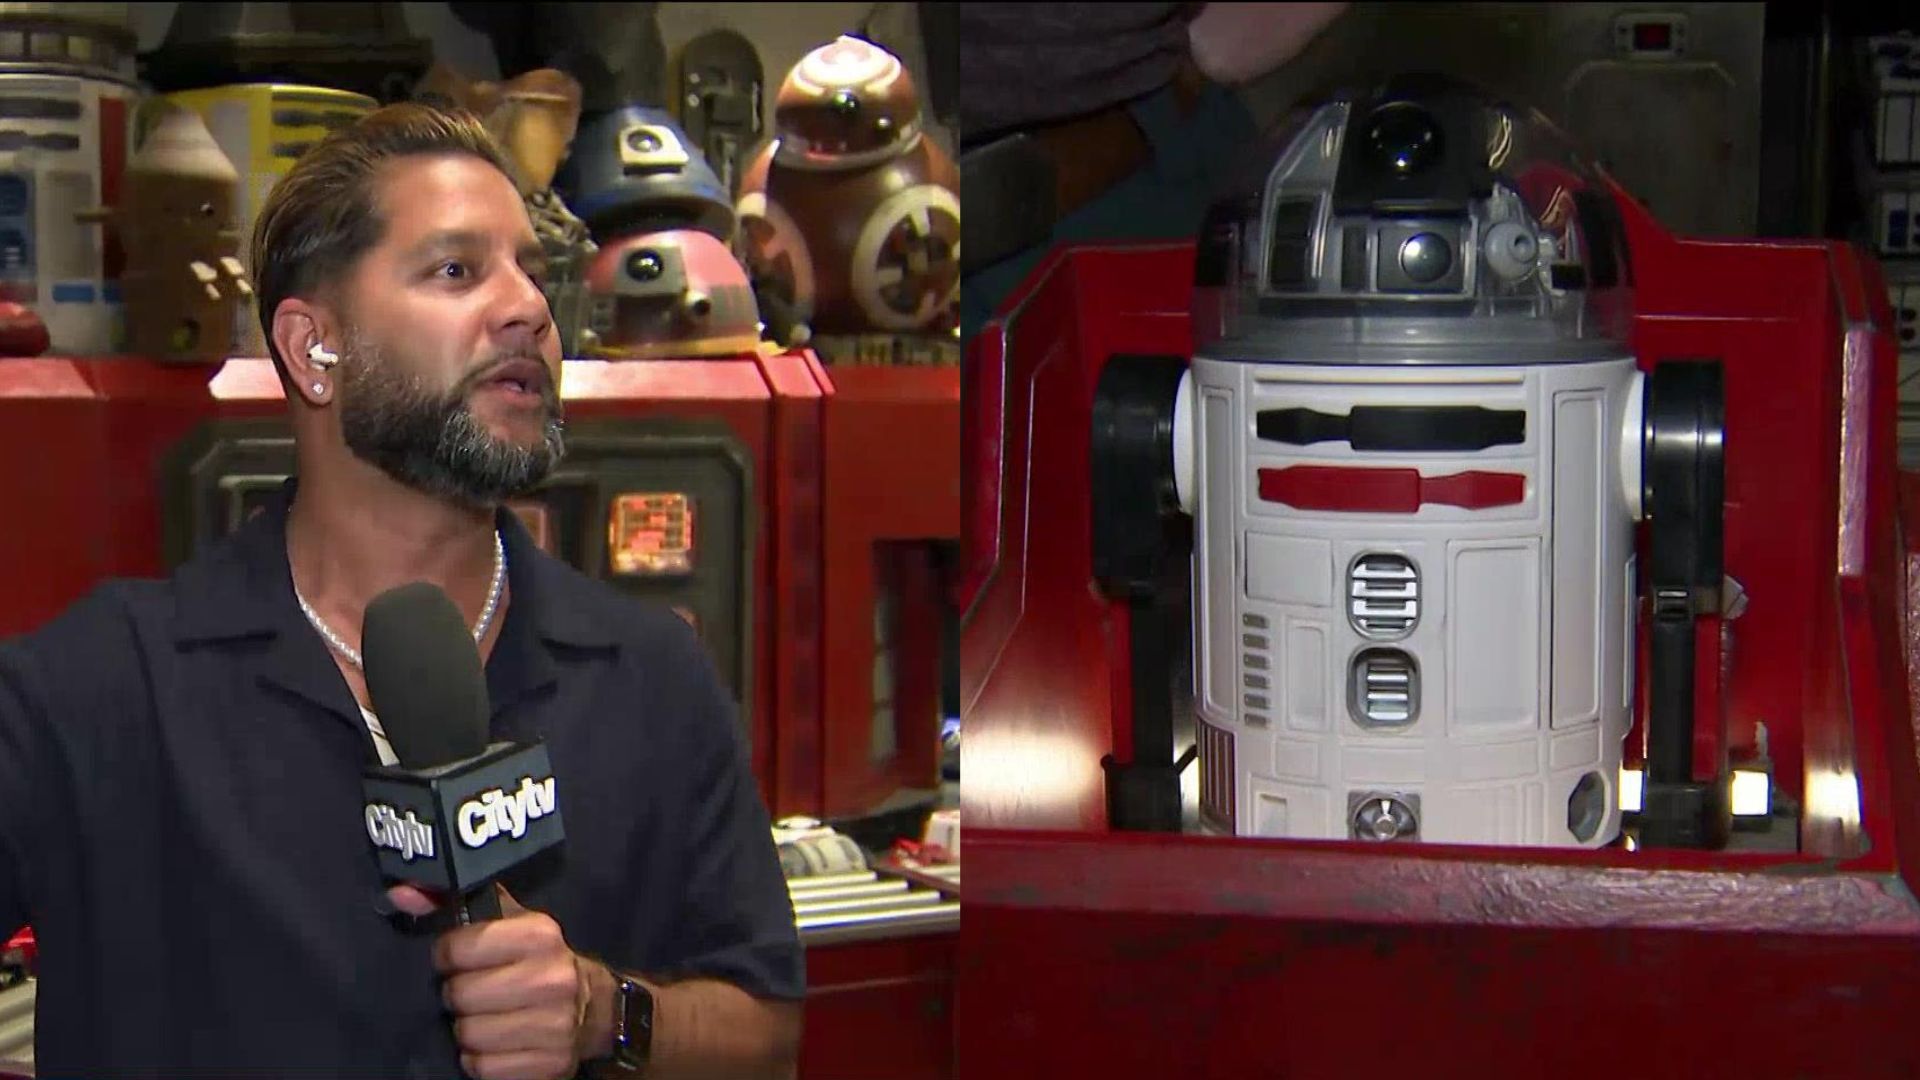 How to customize your own Star Wars droid at Disney World's Hollywood Studios